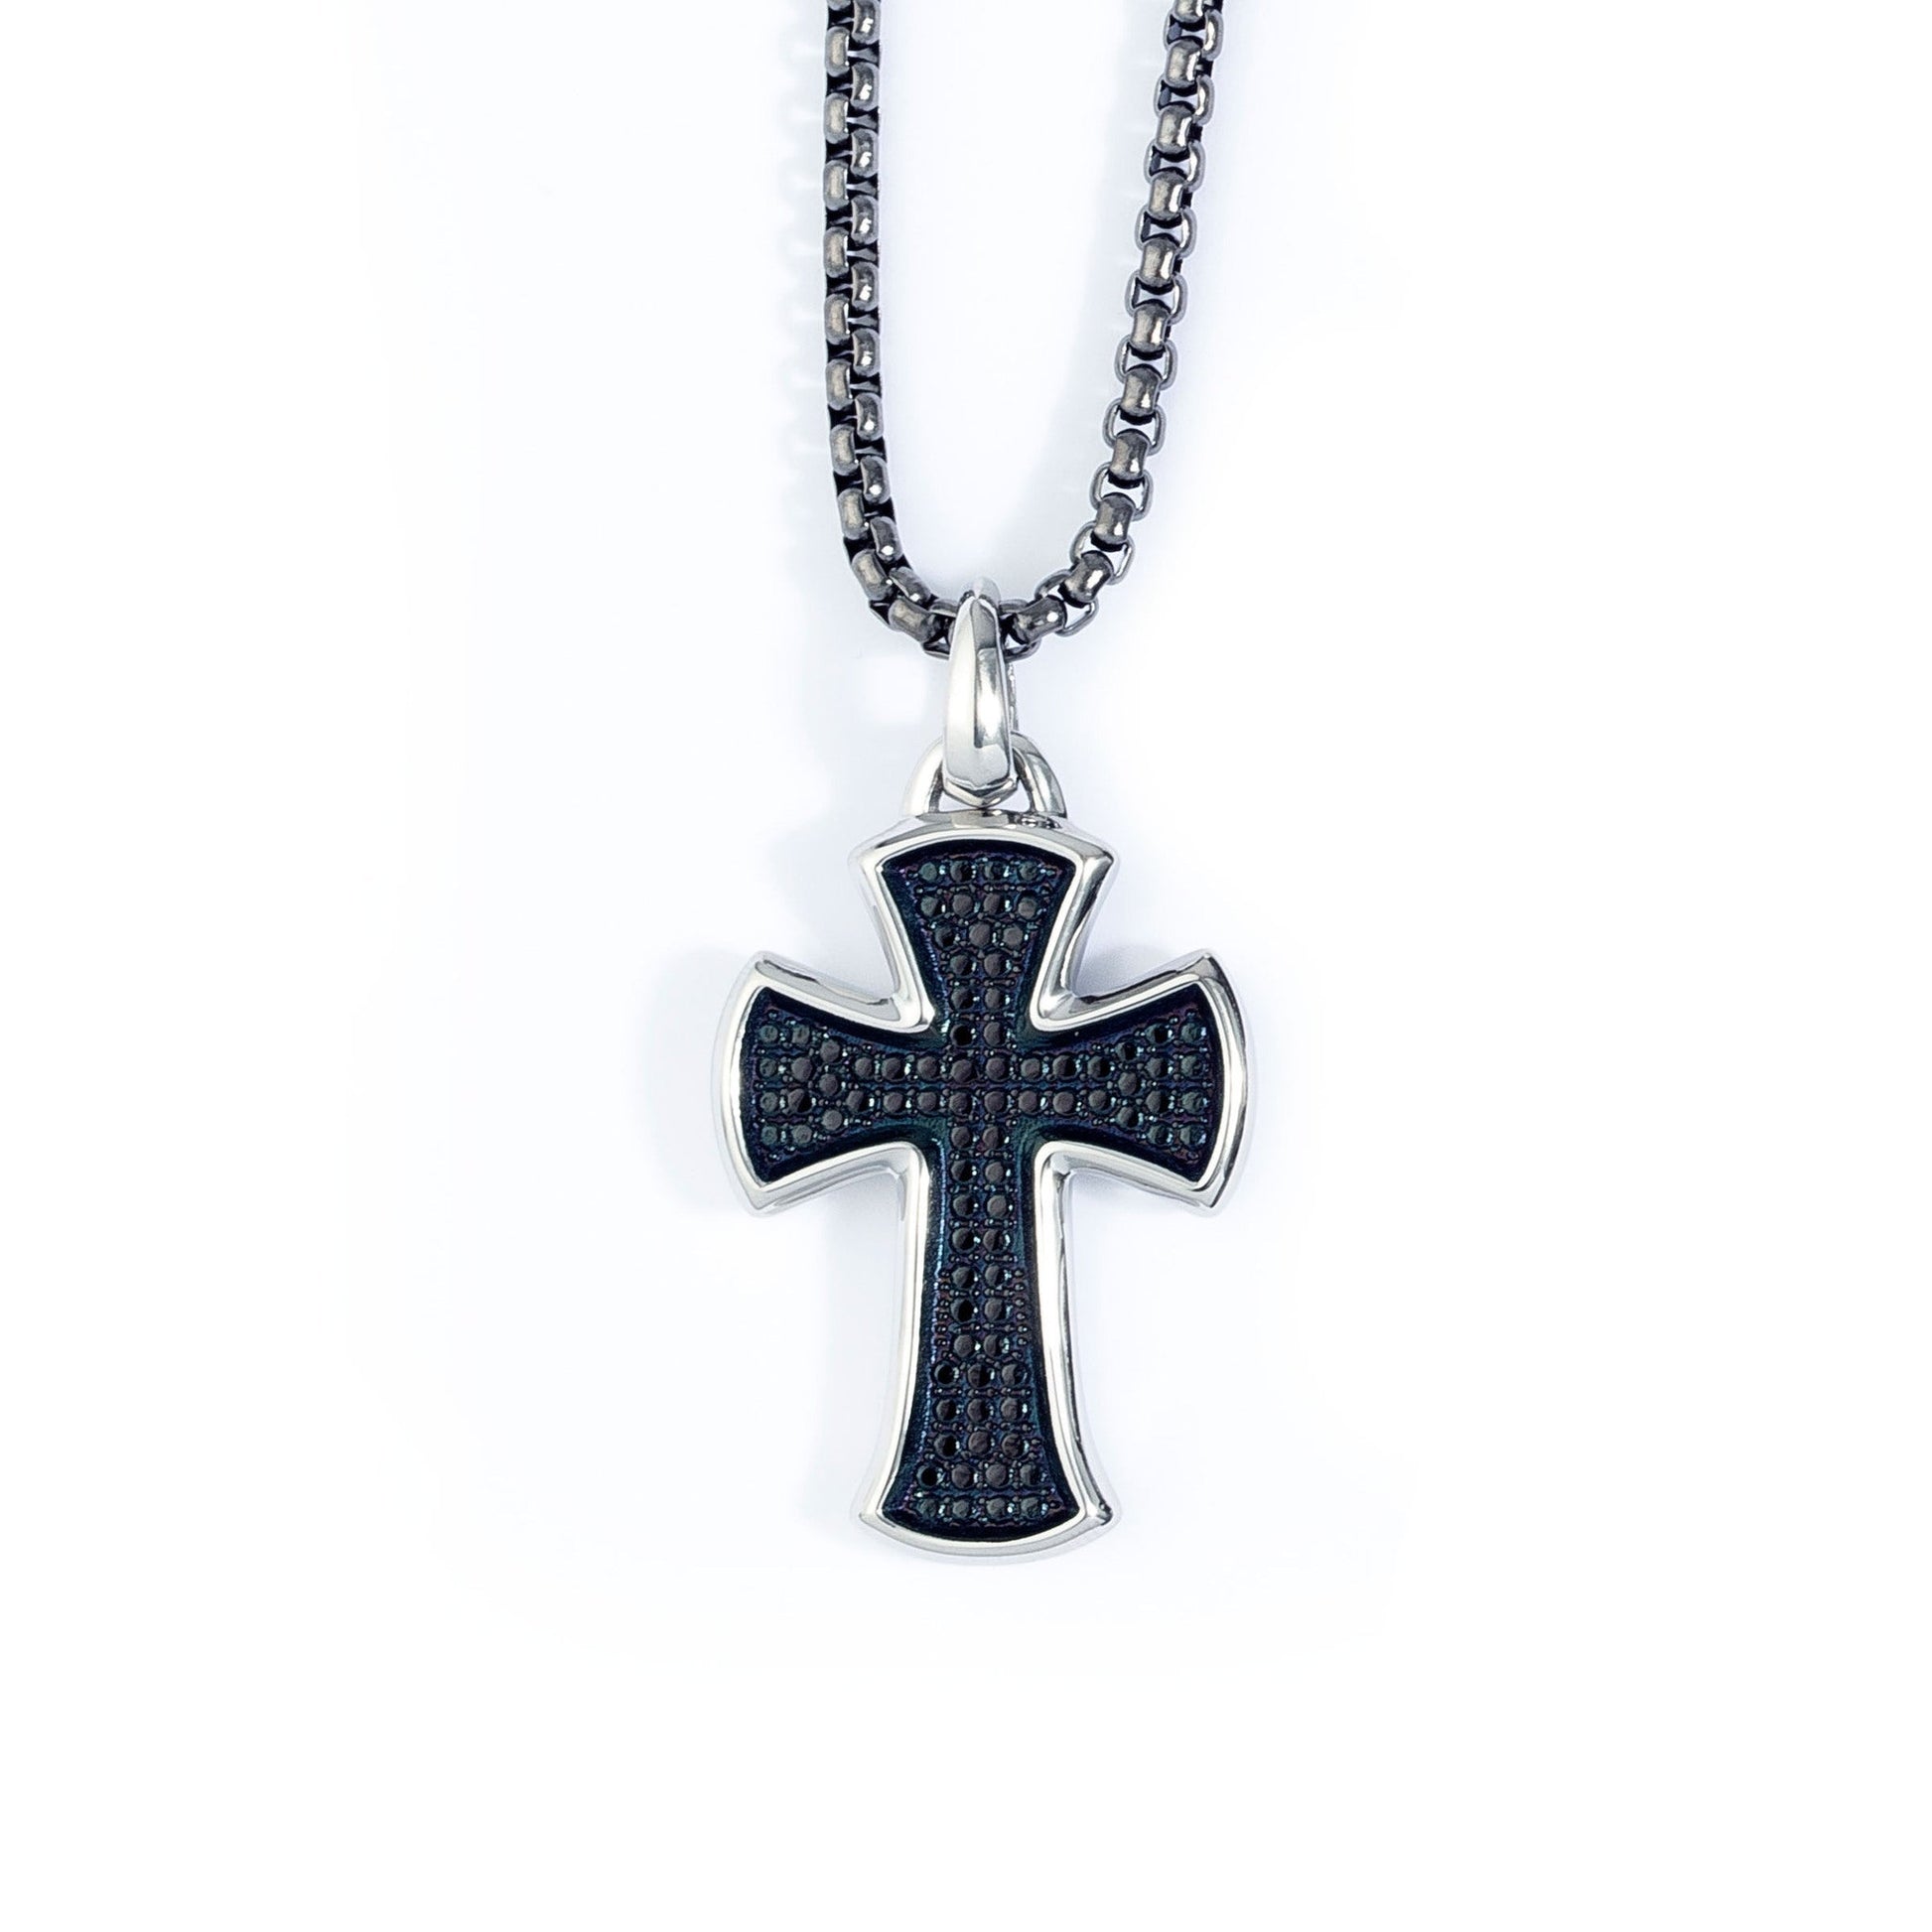 A stainless steel men's cross necklace with black simulated diamonds displayed on a neutral white background.